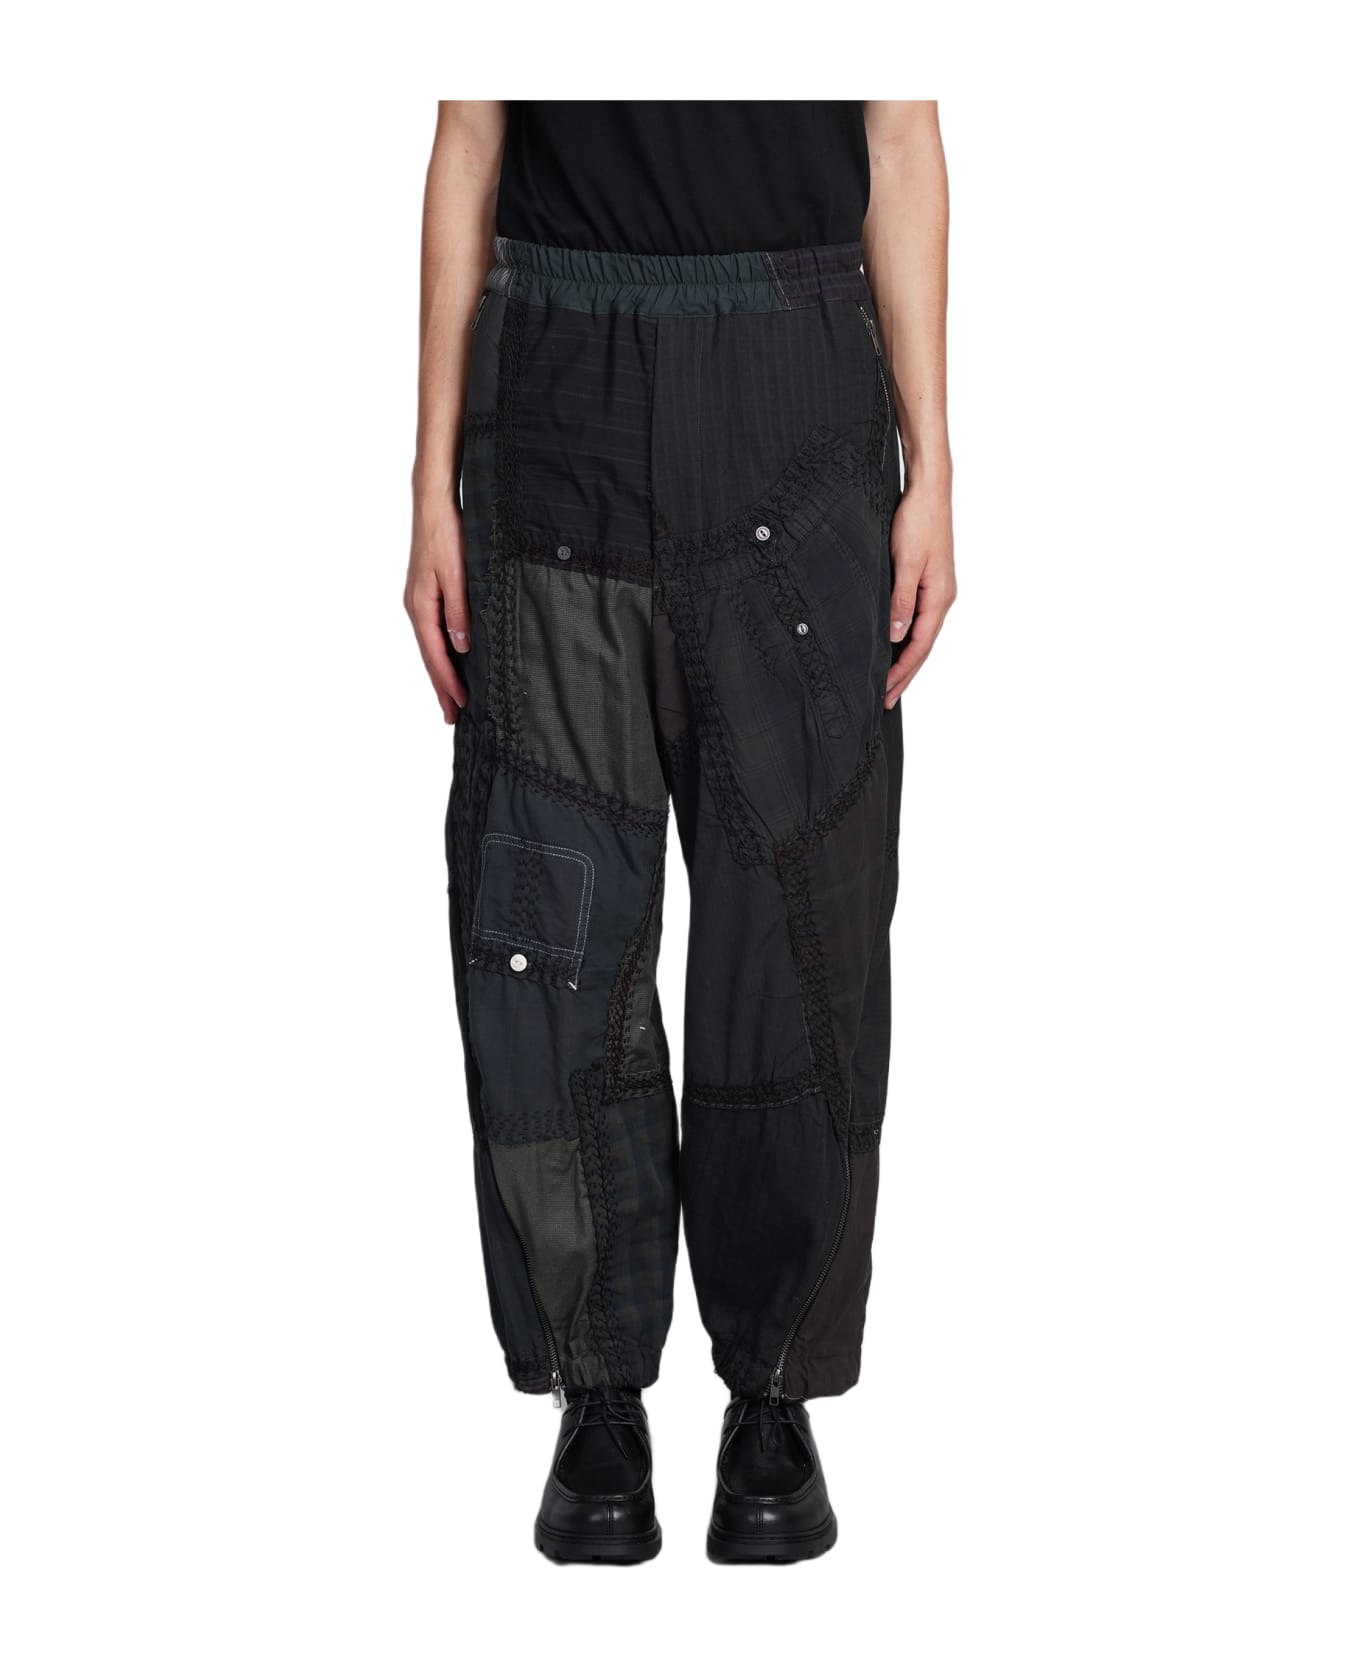 By Walid Harley Pants In Green Cotton - green